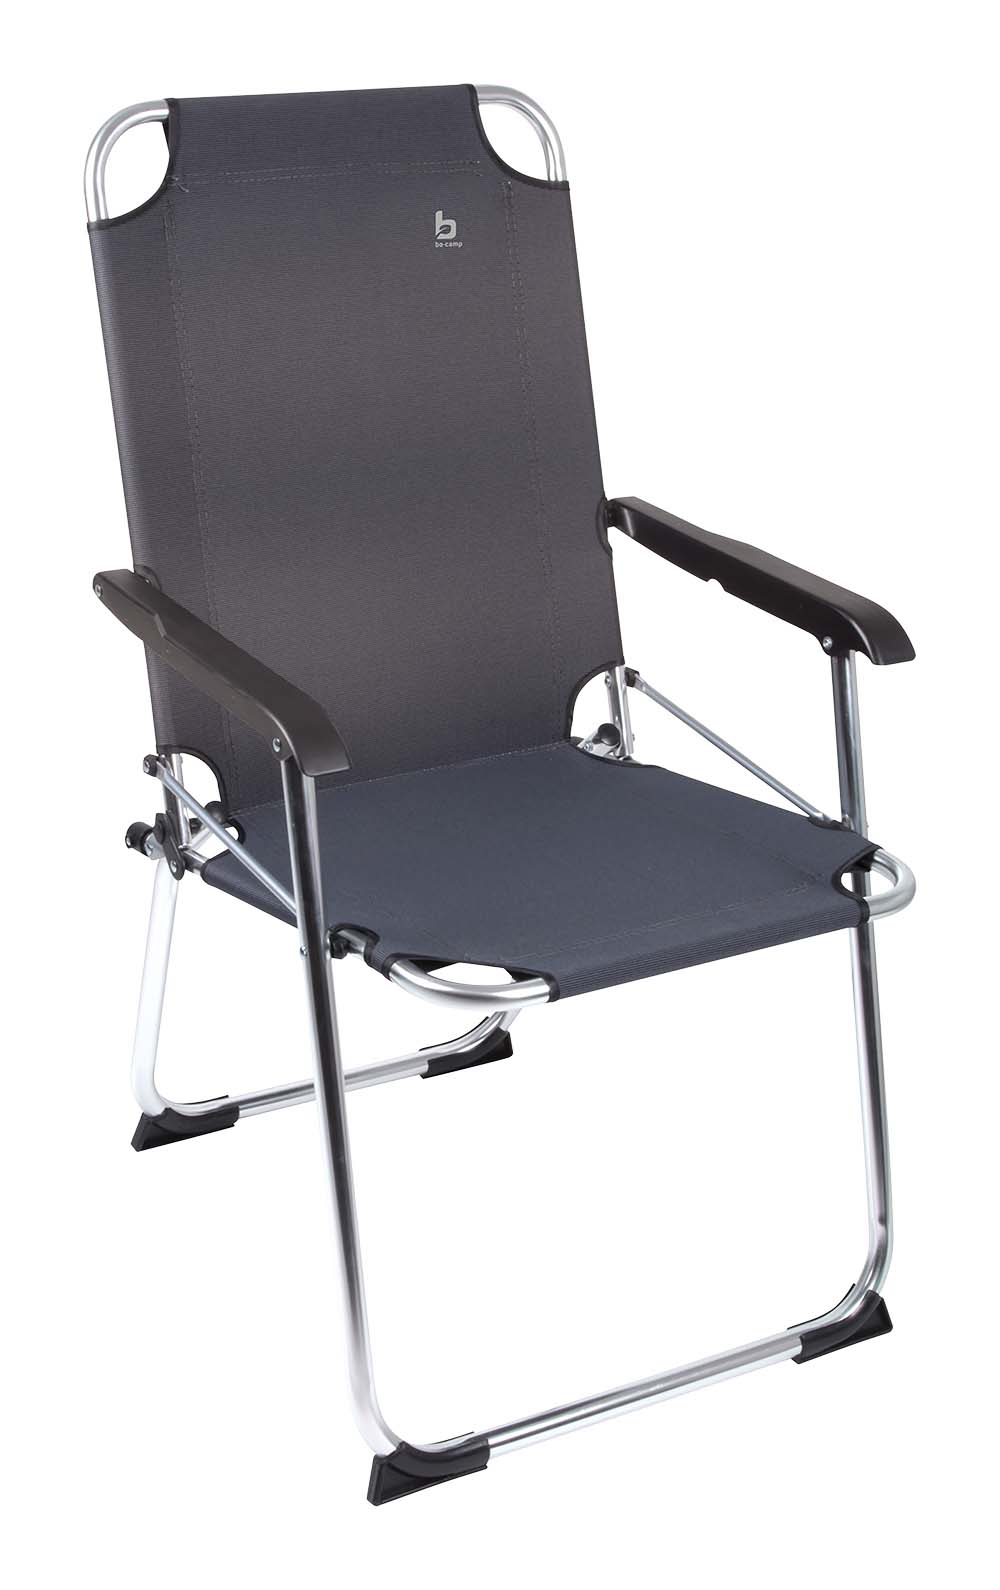 1211937 "A very compact folding chair. A chair where design, comfort and functionality is combined. Equipped with a strong 600 denier nylon fabric and a lightweight aluminium frame. The chair also has extra stabilizers and a 'safety lock' against undesired folding. Compact to carry (folded LxWxH): 64x55x7 centimetres. Seat height: 40 centimetres. Seat depth: 43 centimetres. Seat width: 44 centimetres. Maximum load bearing capacity: 100 kilogram."